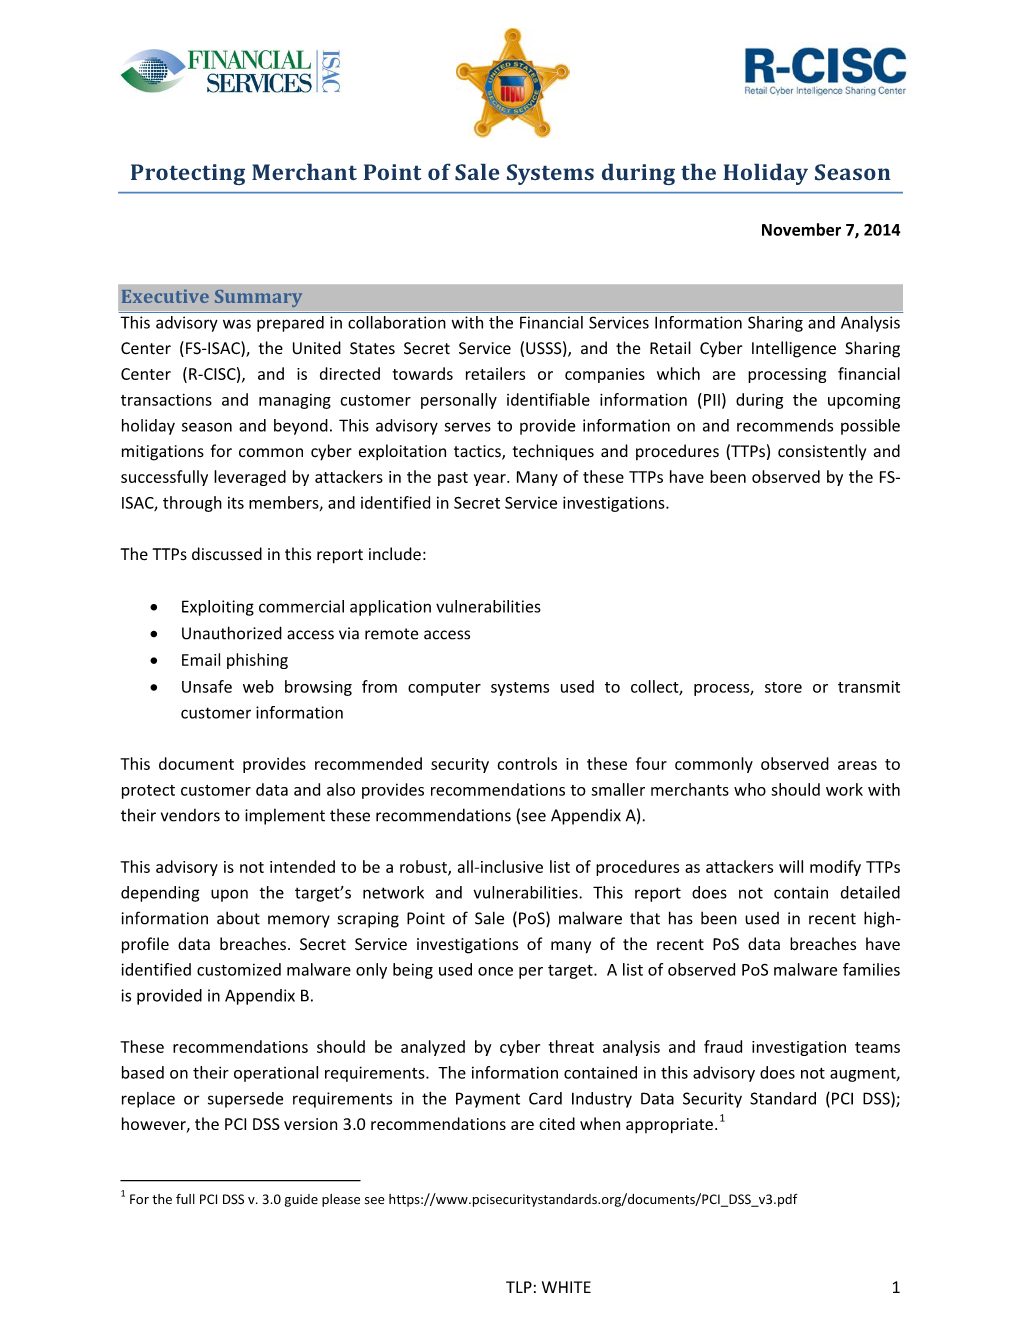 Protecting Merchant Point of Sale Systems During the Holiday Season